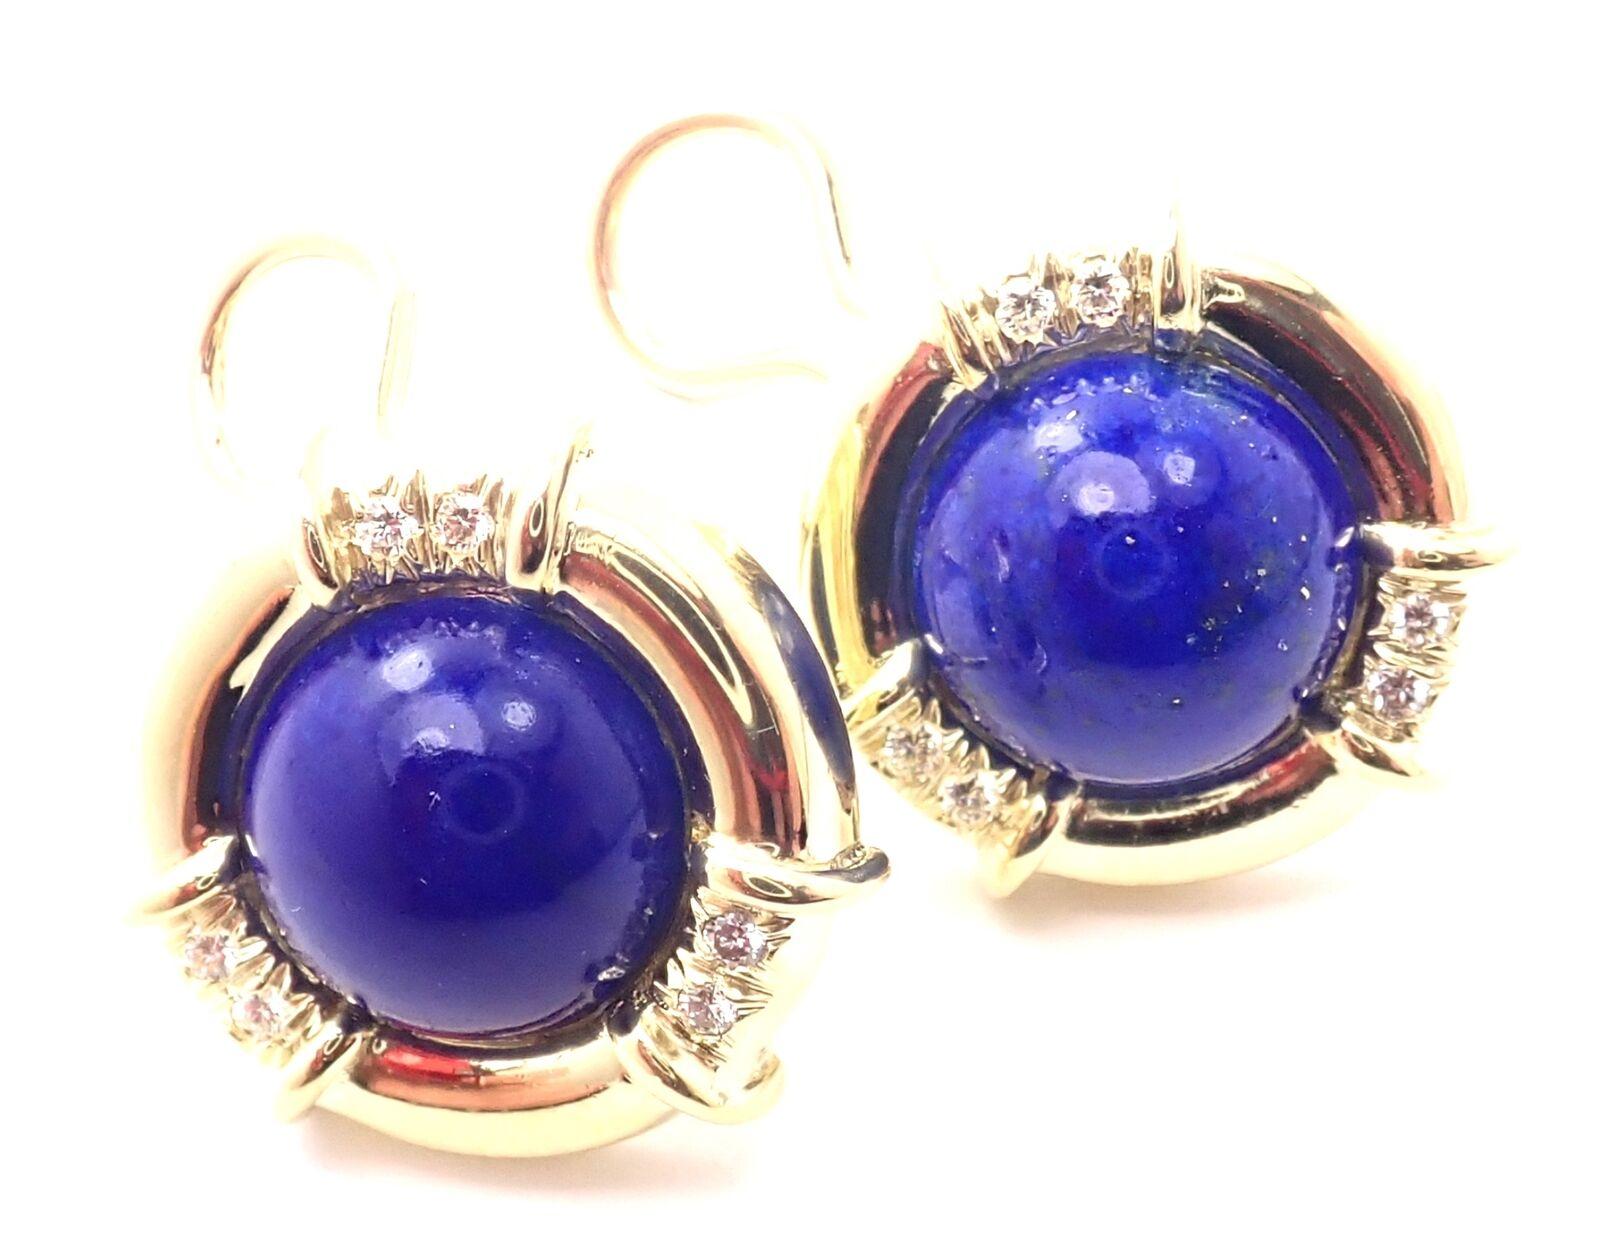 Tiffany & Co Diamond Lapis Lazuli Yellow Gold Earrings In Excellent Condition For Sale In Holland, PA